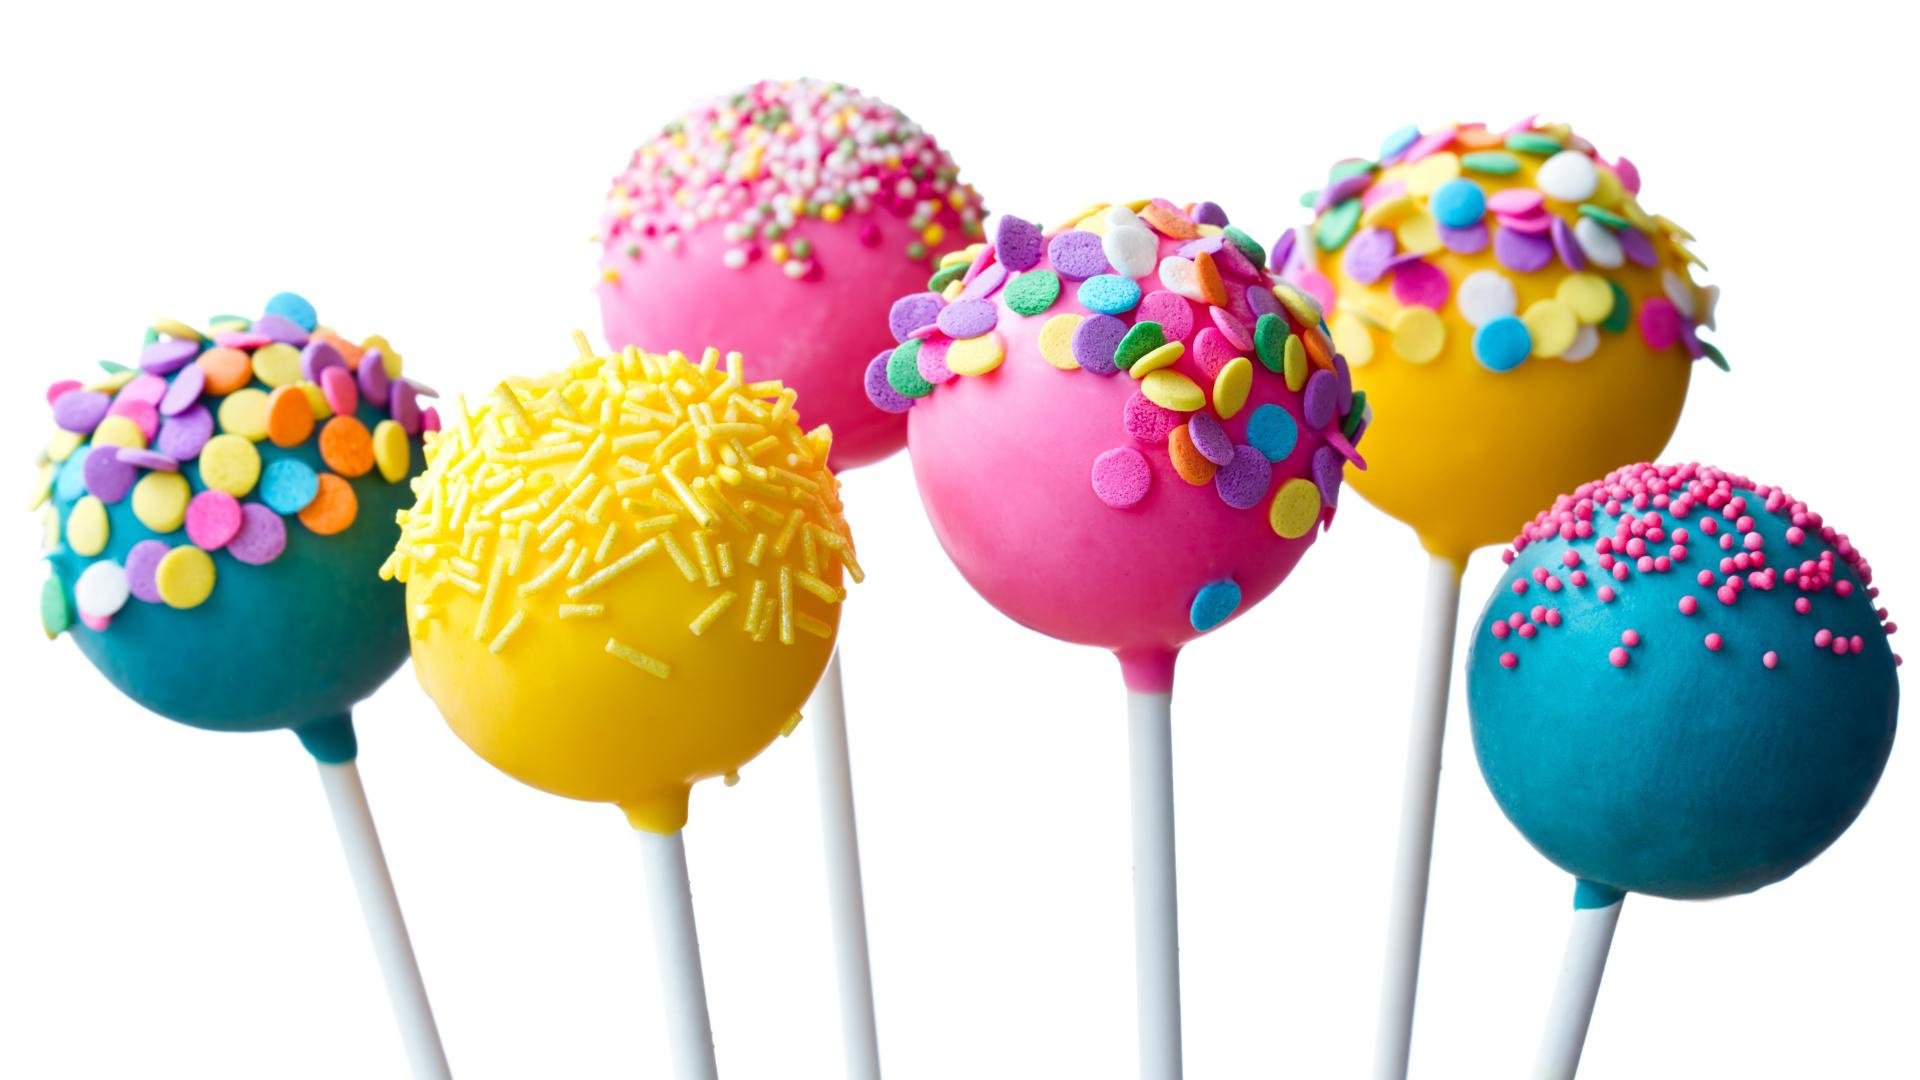 Lollipop For Galaxy A Series In Works, No Plans On Android 5.1 And Galaxy Note 2 Yet